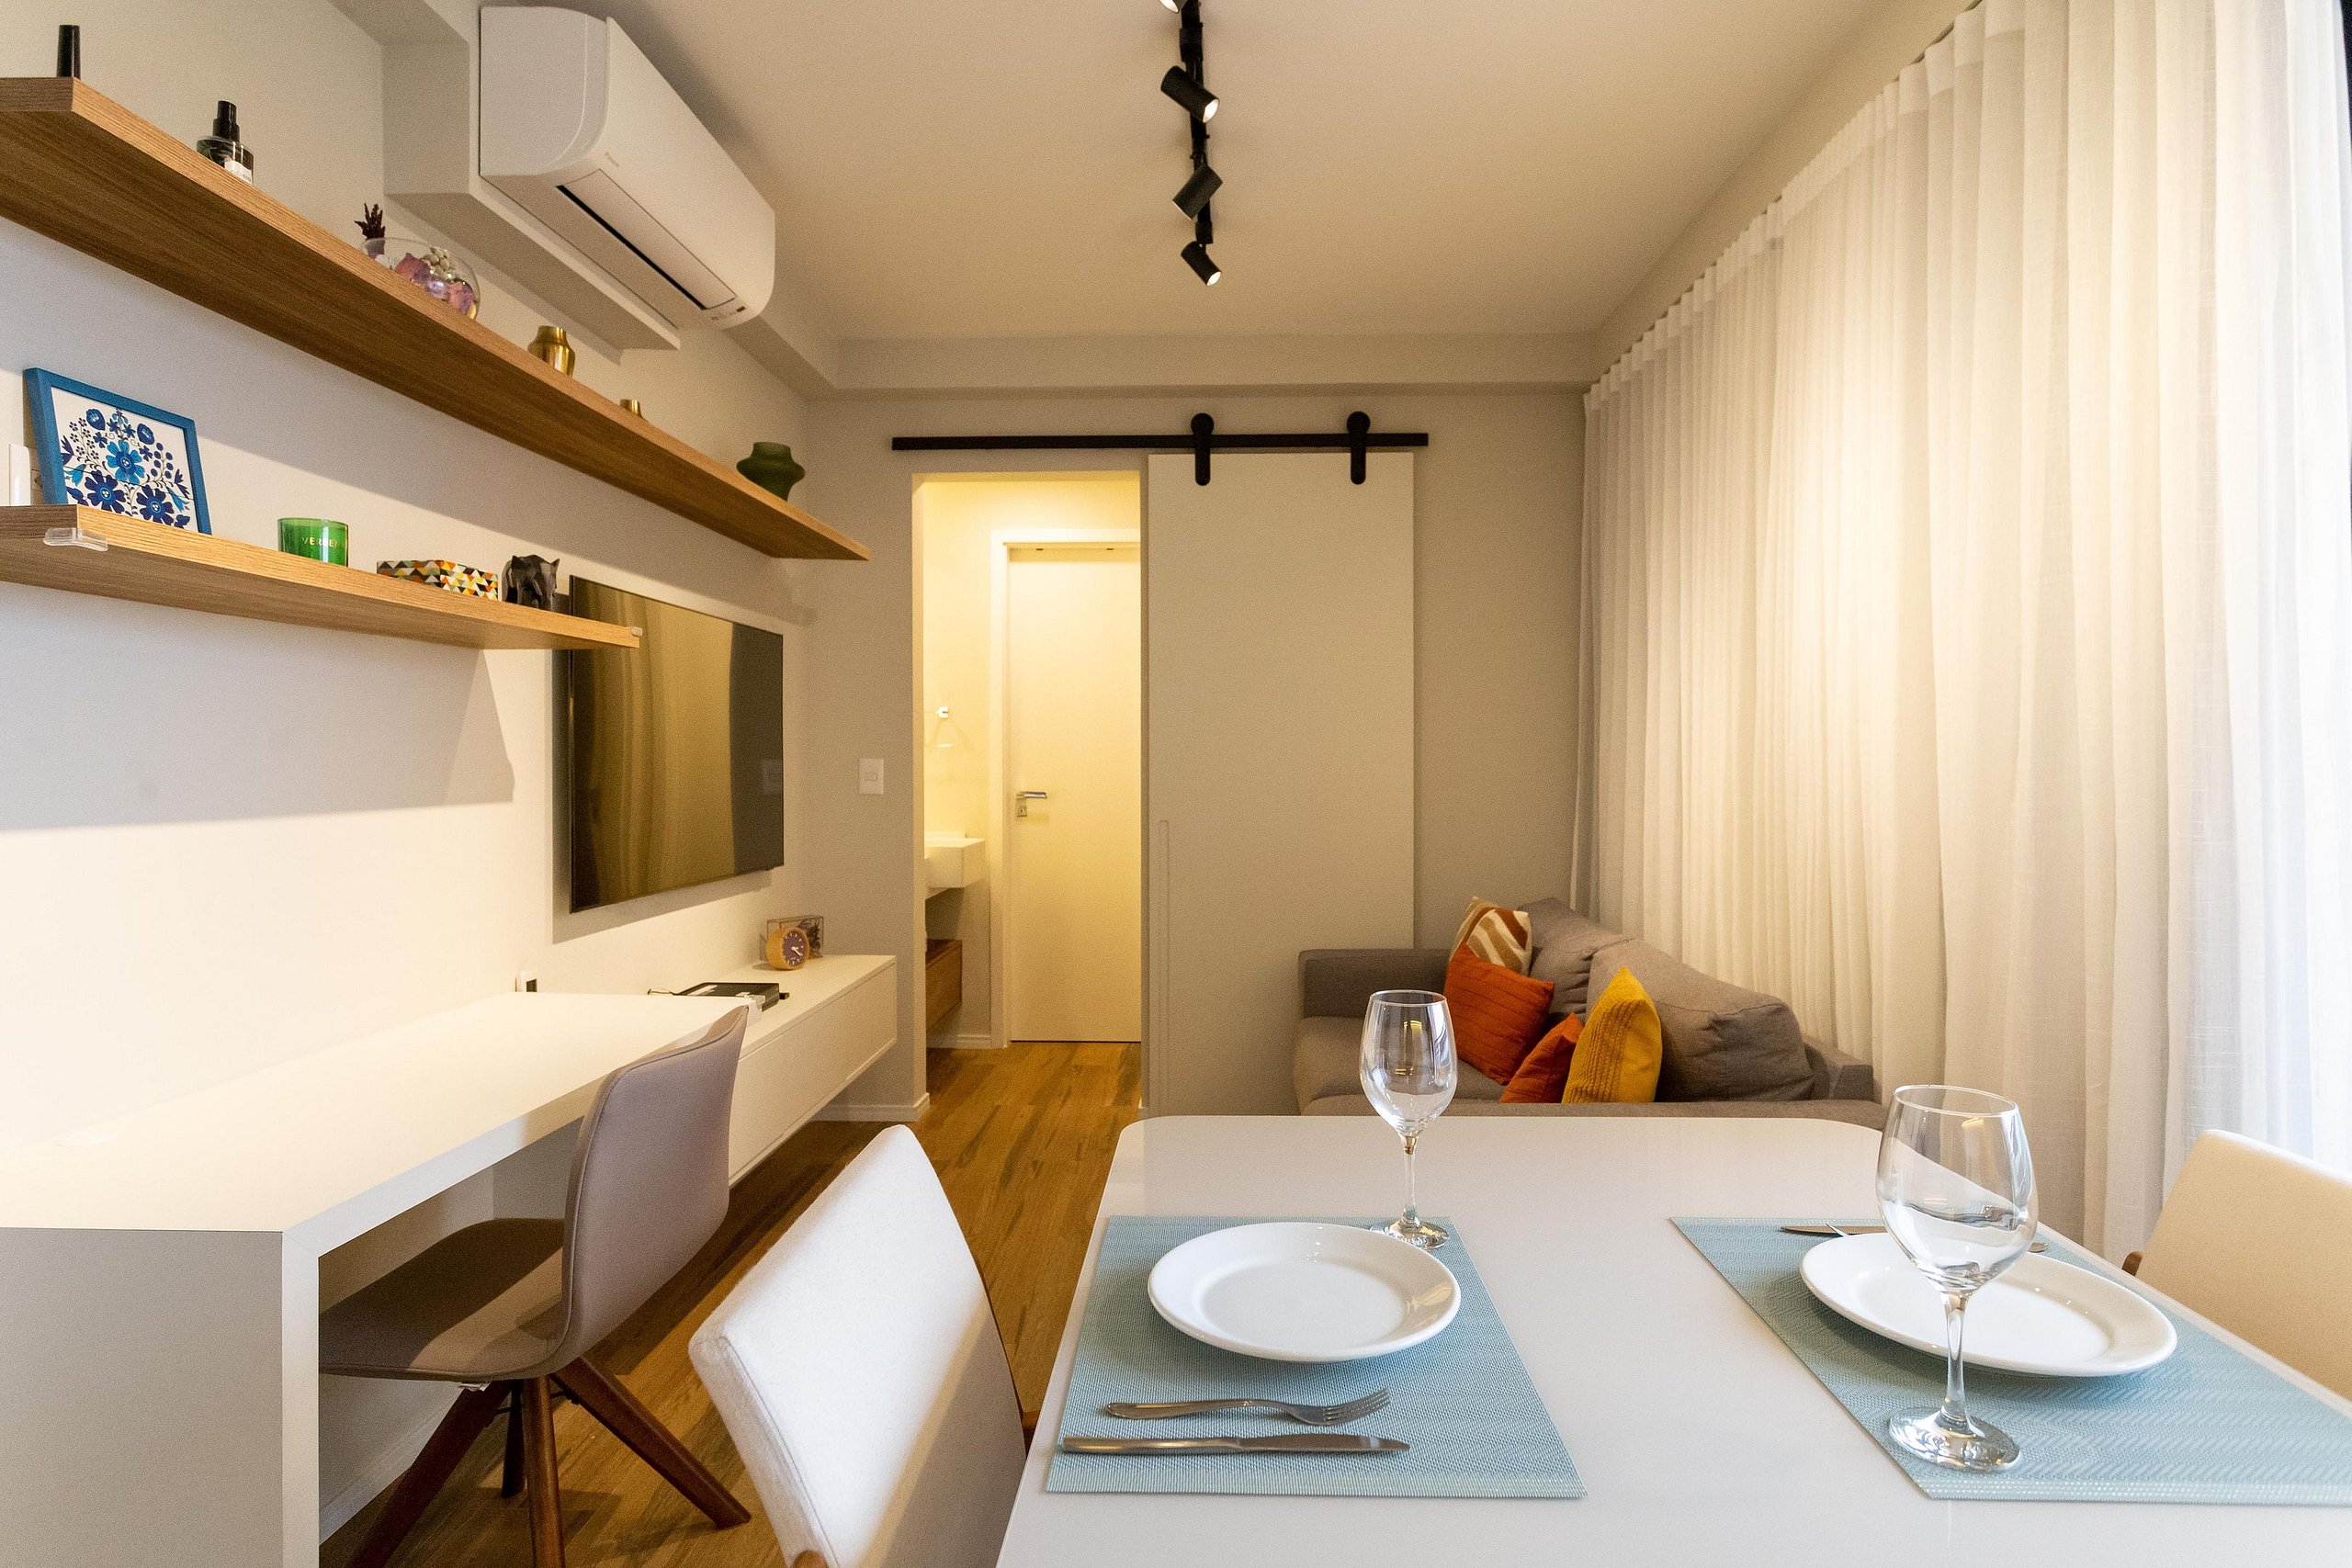 Property Image 2 - Newly apartment, quiet and with leisure infrastructure in Vila Madalena, Sao Paulo.